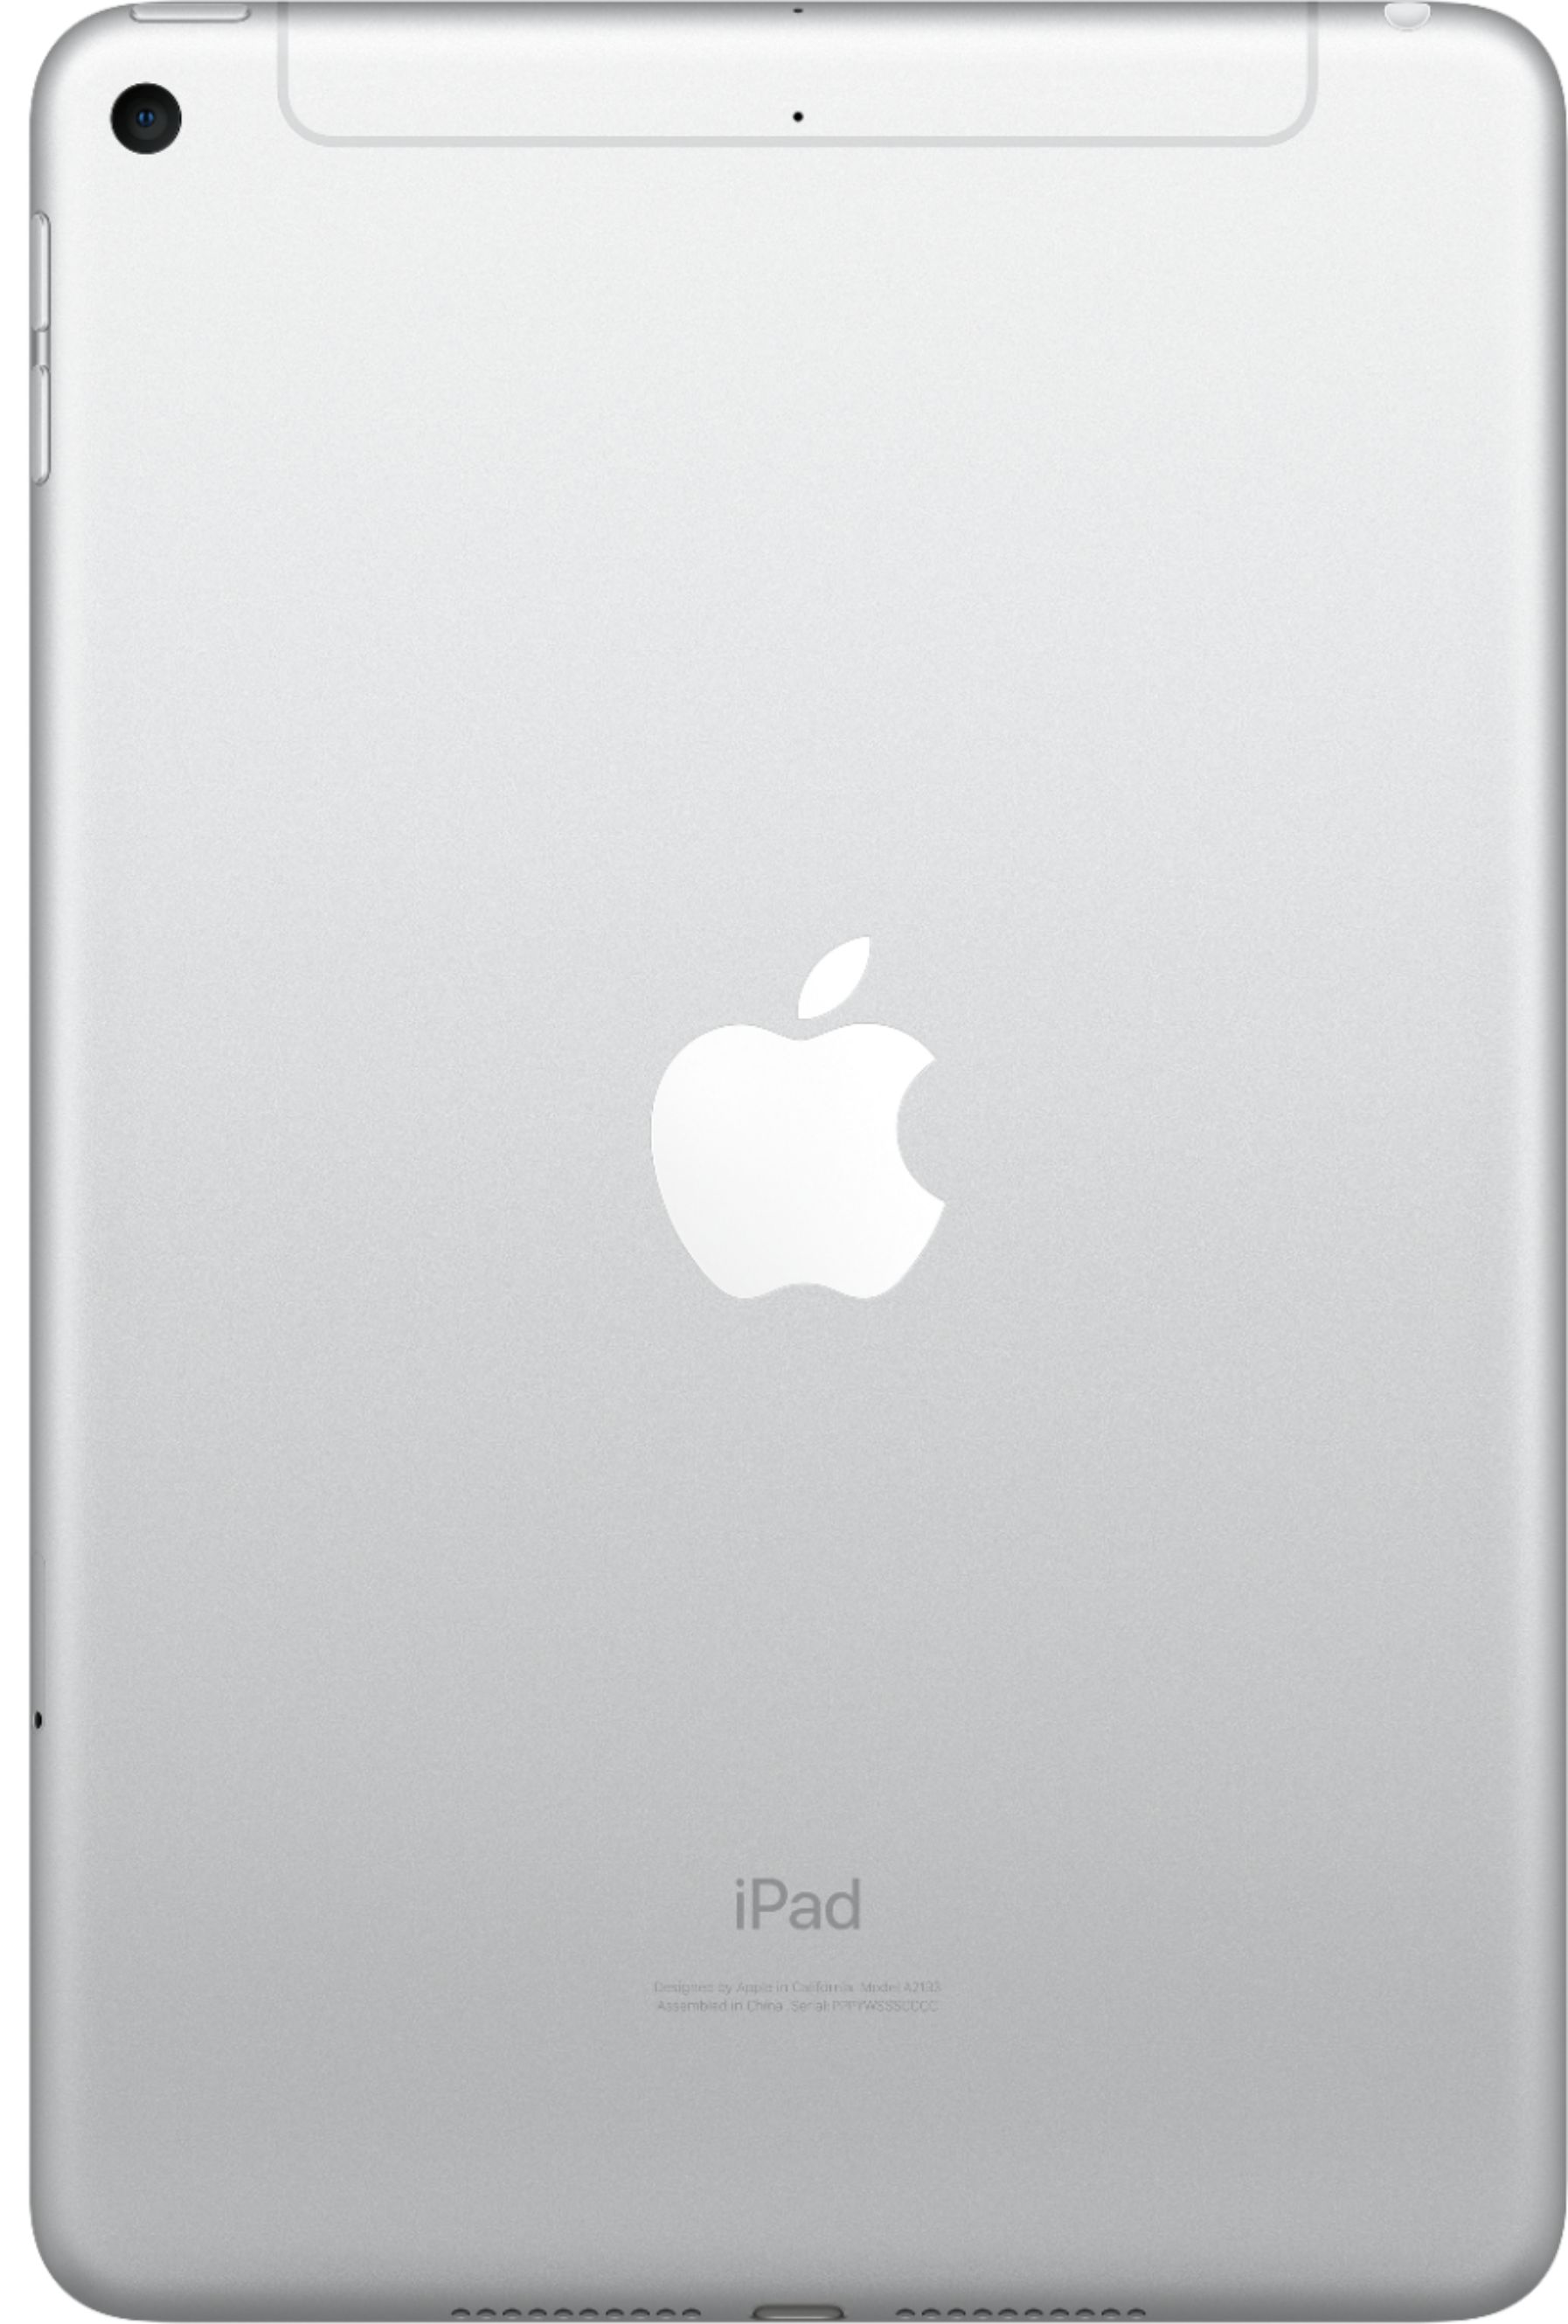 Back View: Apple - 10.2-Inch iPad (9th Generation) with Wi-Fi - 256GB - Space Gray